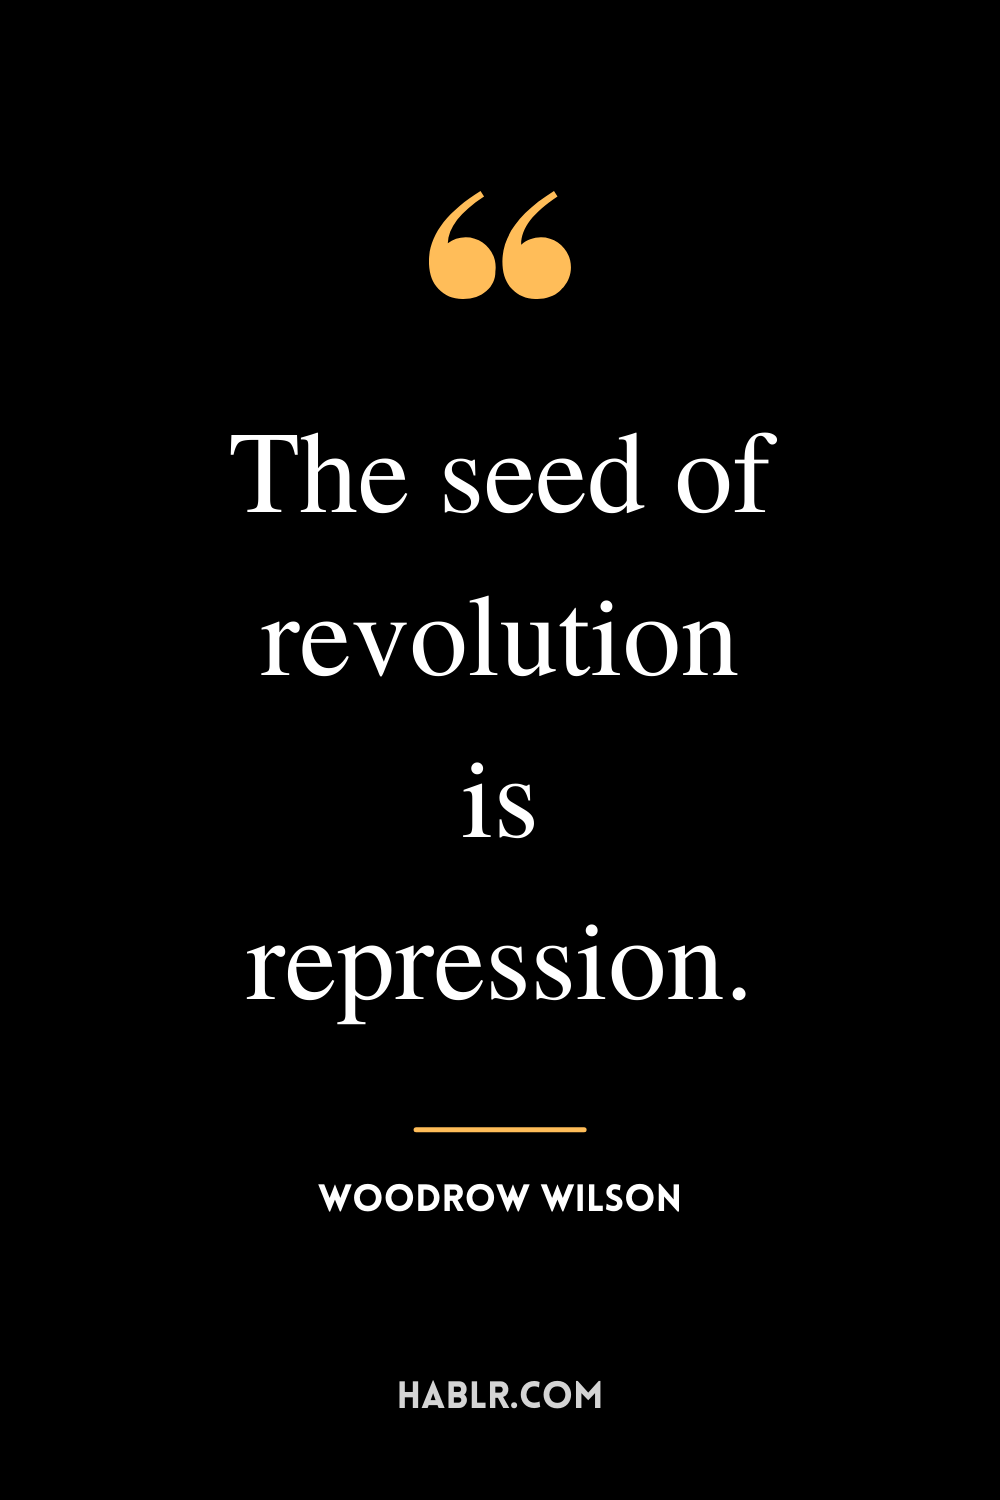 "The seed of revolution is repression." -Woodrow Wilson